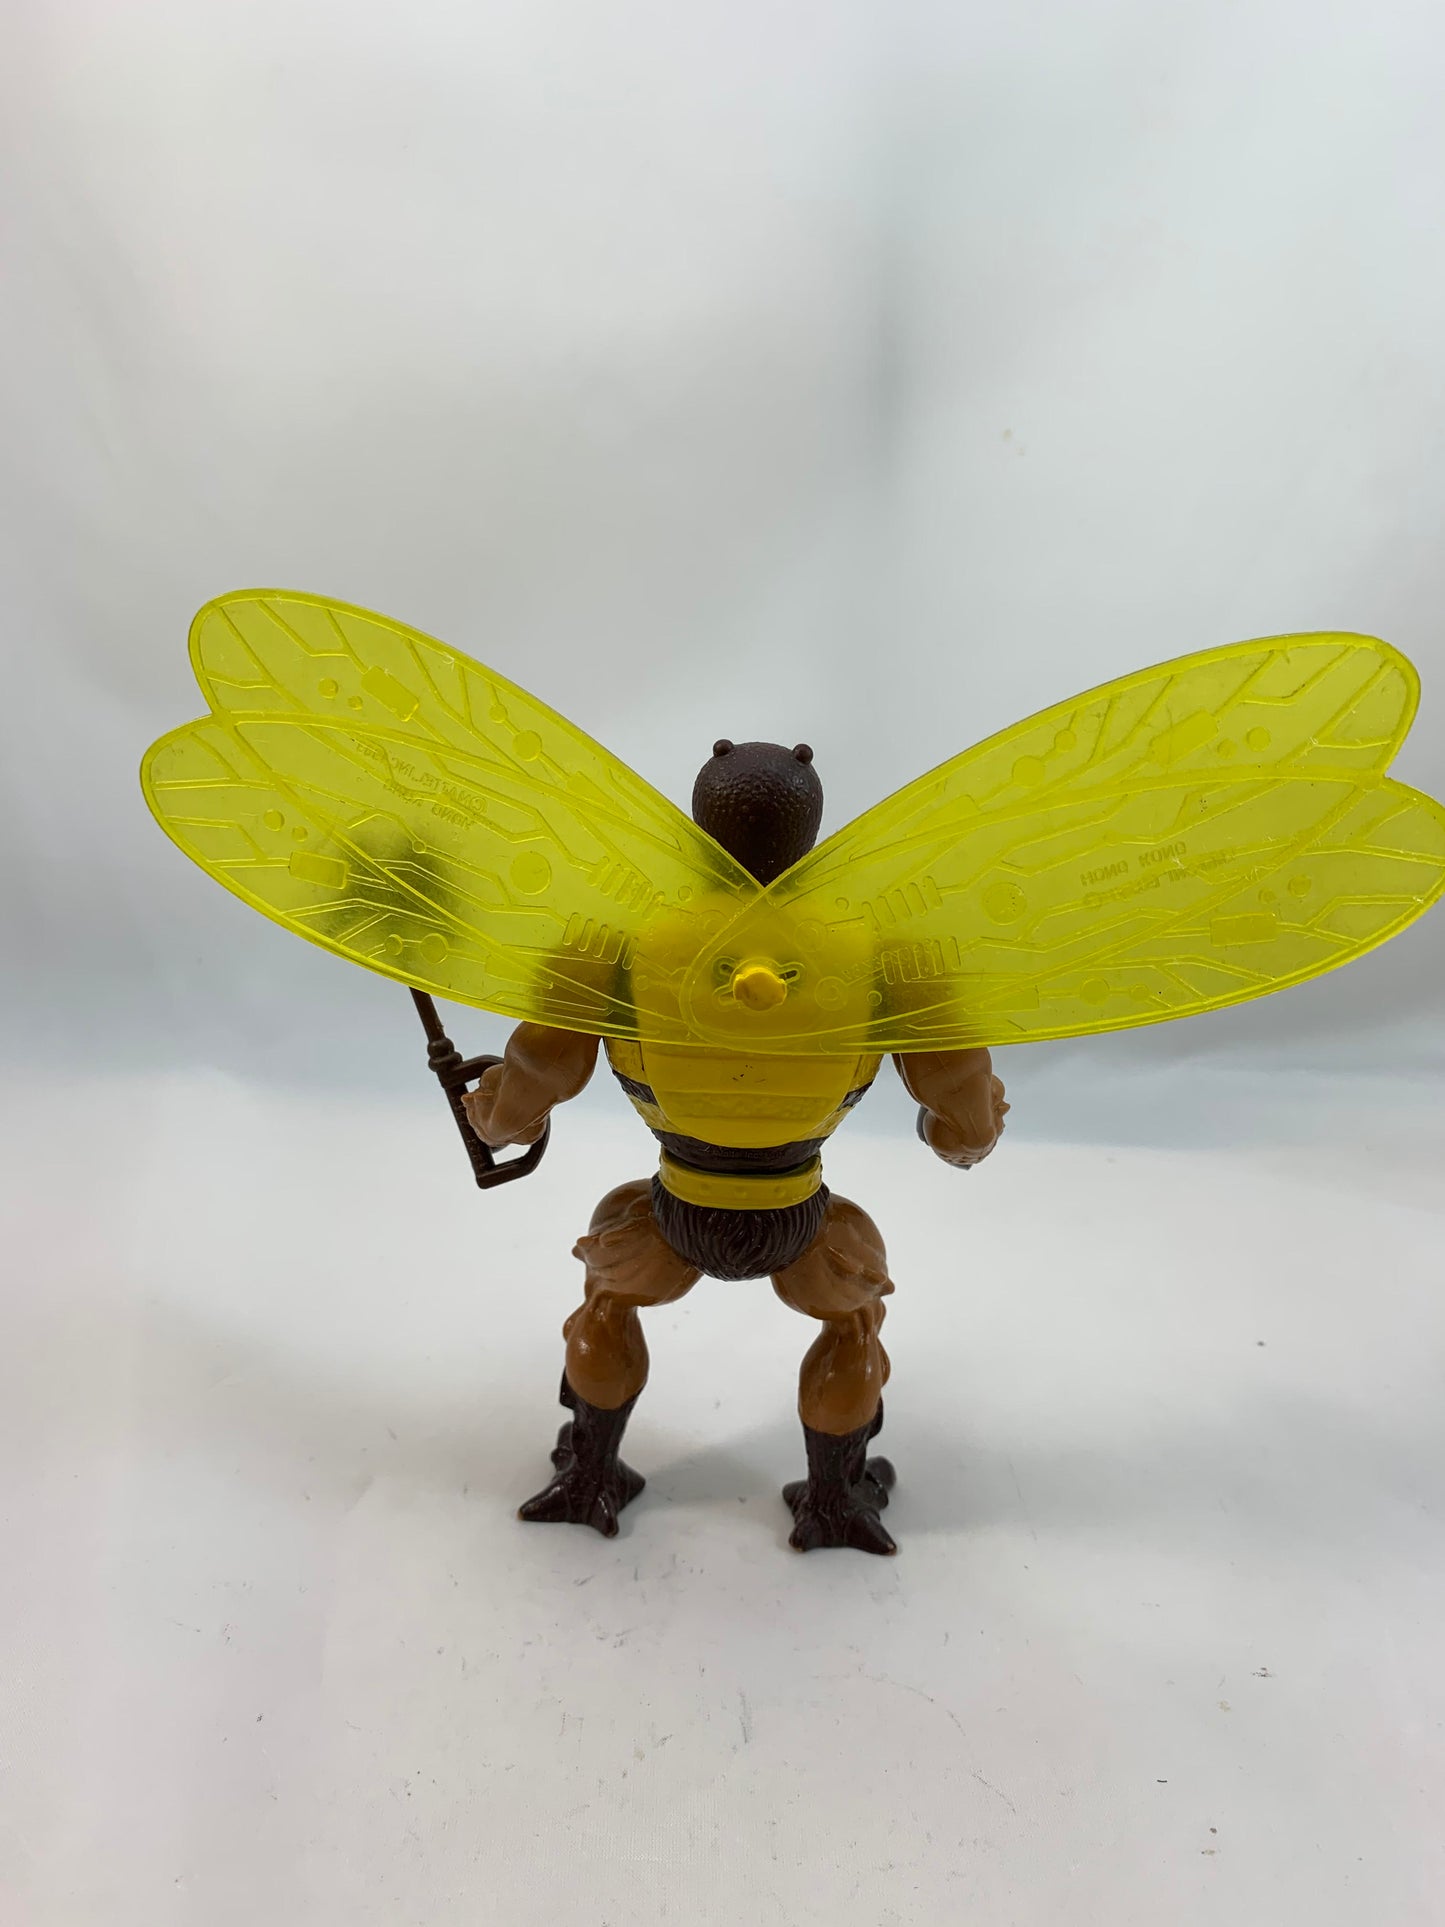 Mattel Vintage He Man Masters Of The Universe MOTU 'Buzz off' with axe Action Figure #796 - Loose